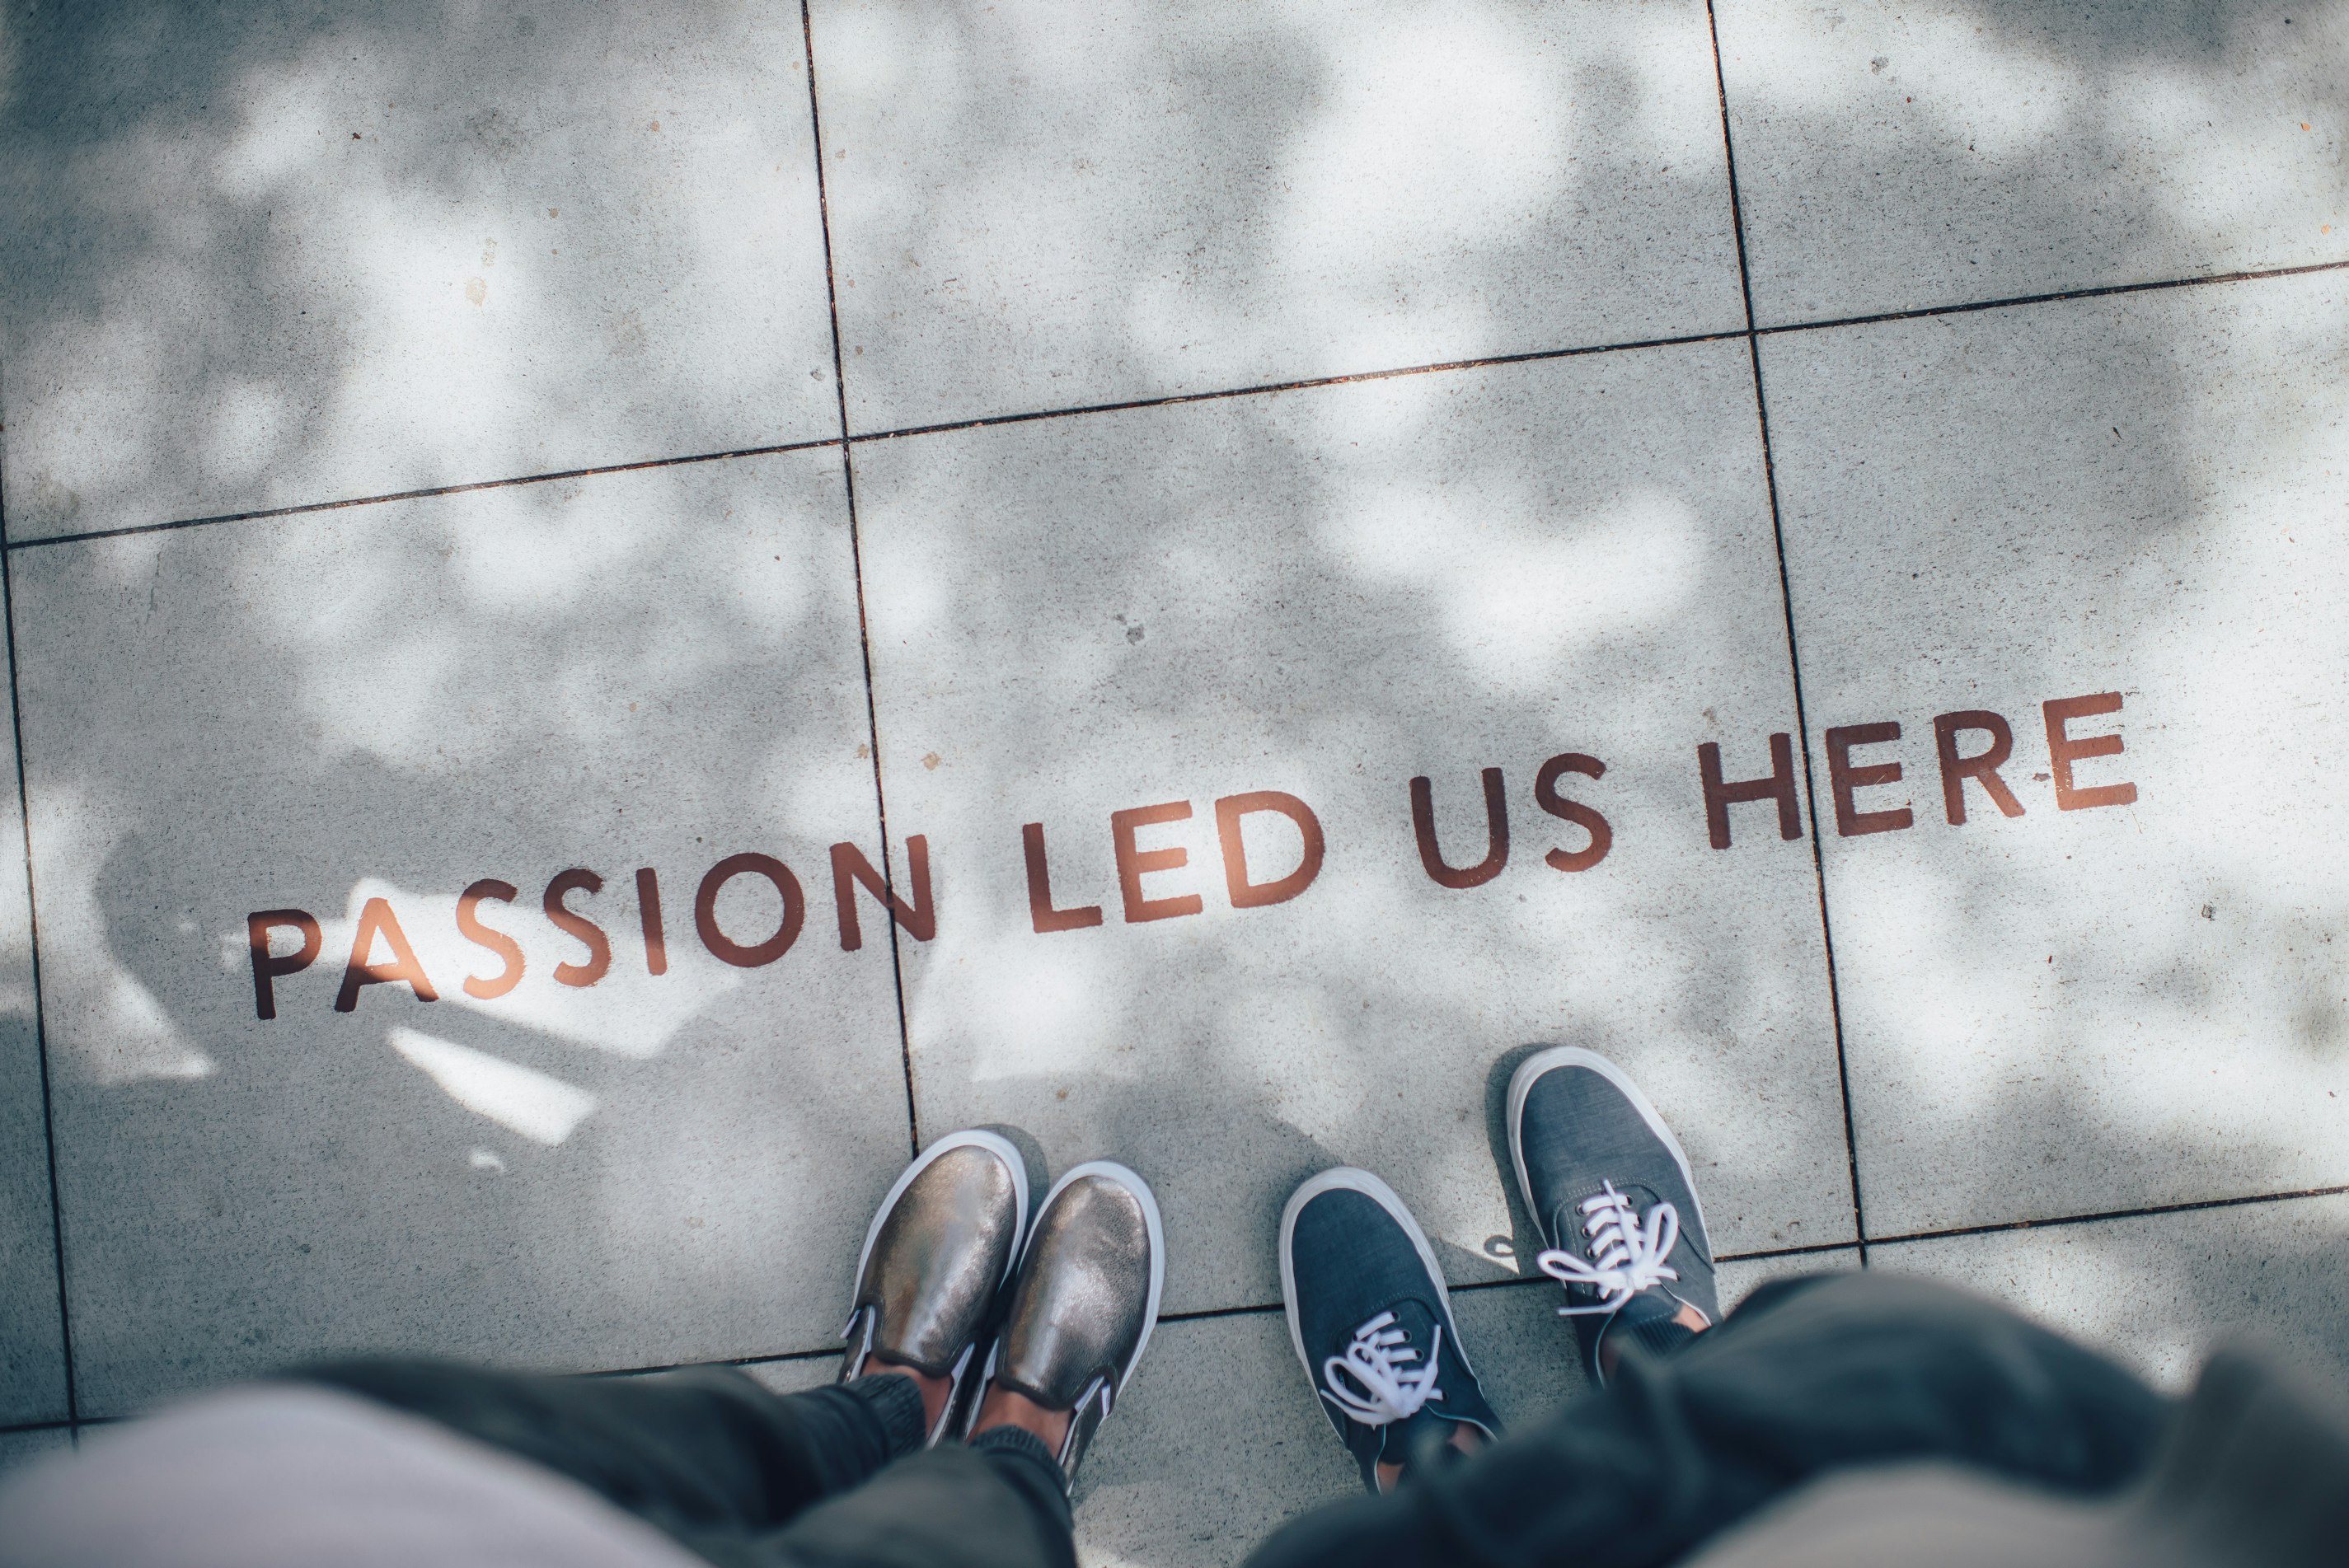 Passion led us here; follow your passion, utilize your skills, find what fits best for you during the job search